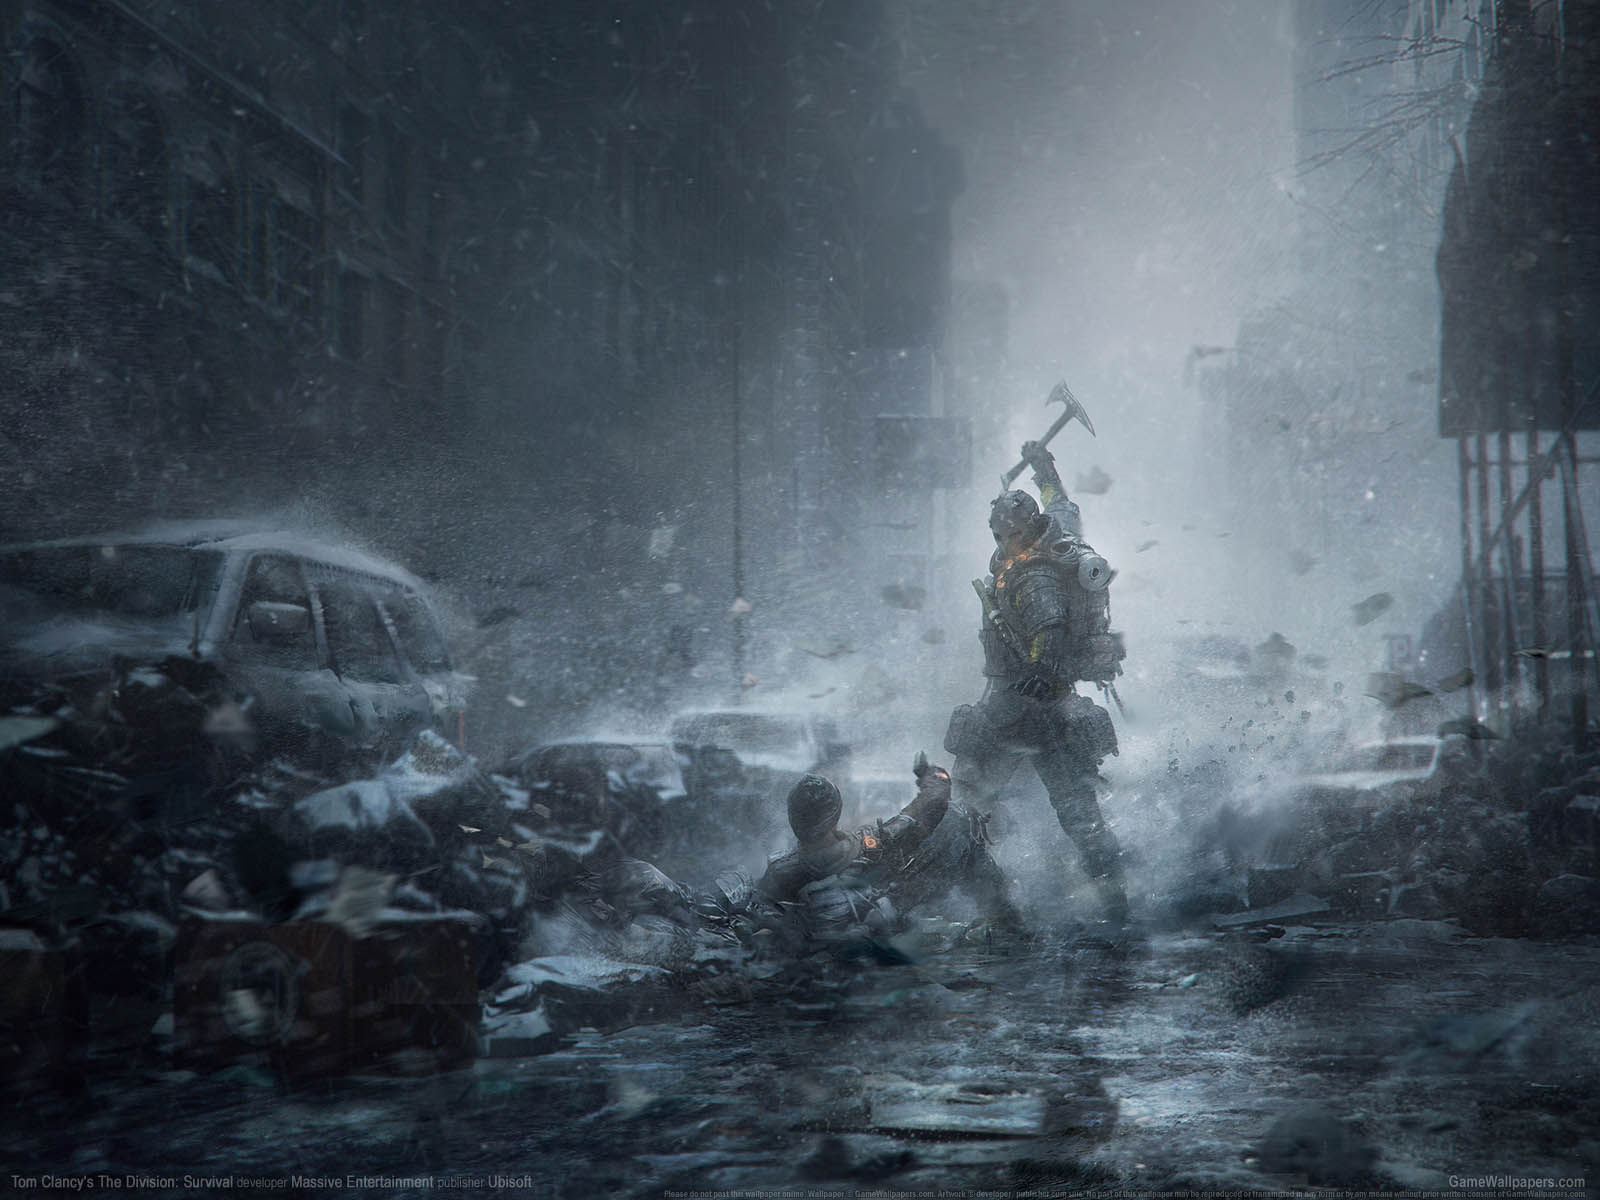 Tom Clancy's The Division: Survivalνmmer=02 wallpaper  1600x1200